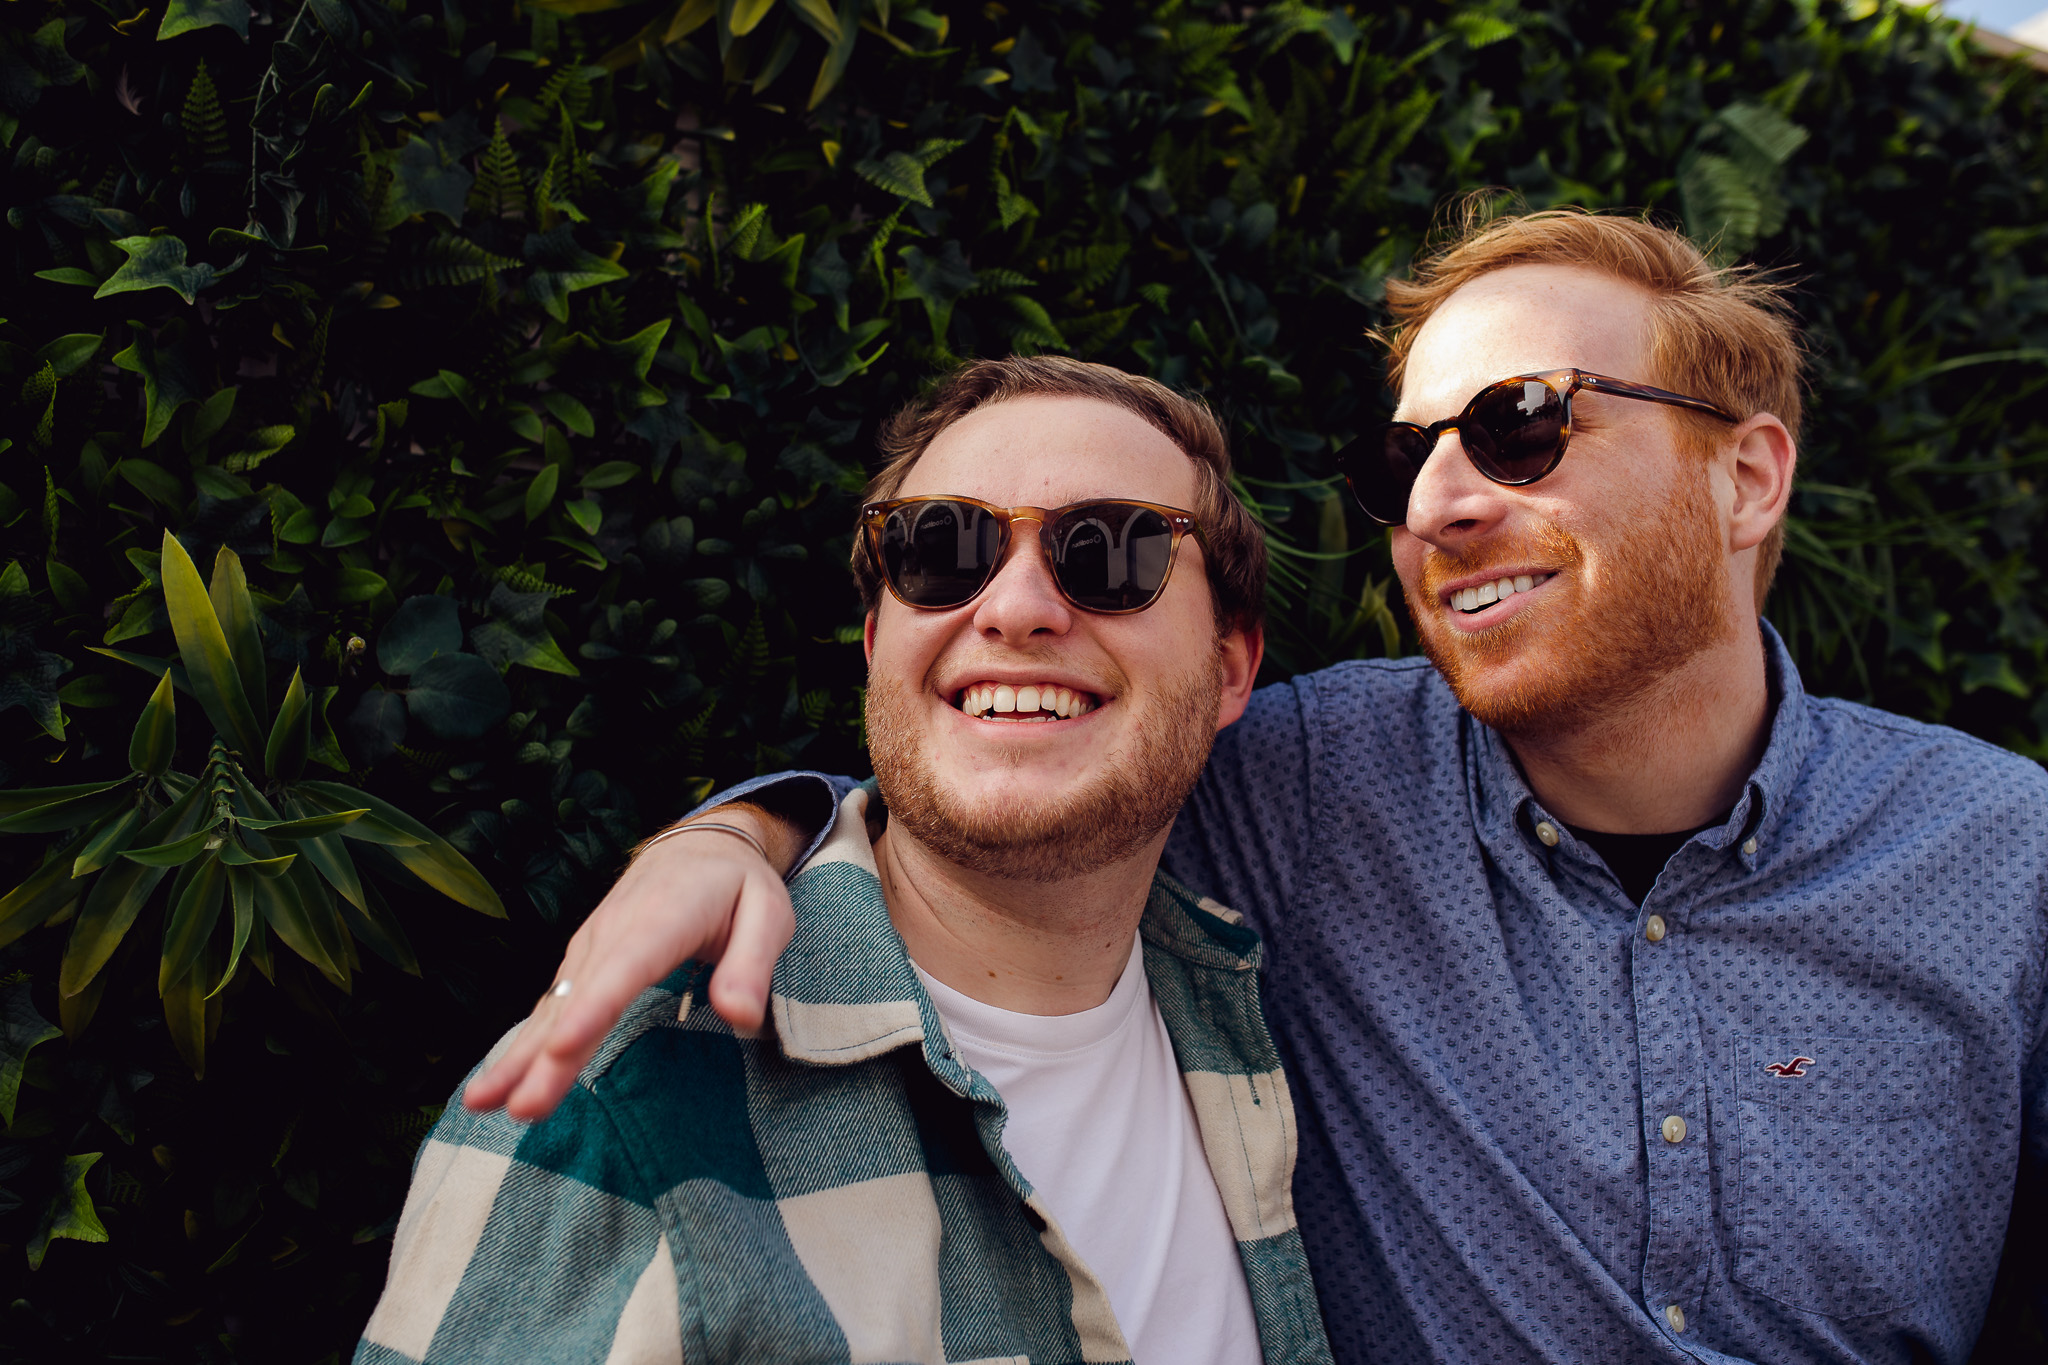 LGBTQ+ couple during their engagement session wearing sunglasses and smiling next to a bush